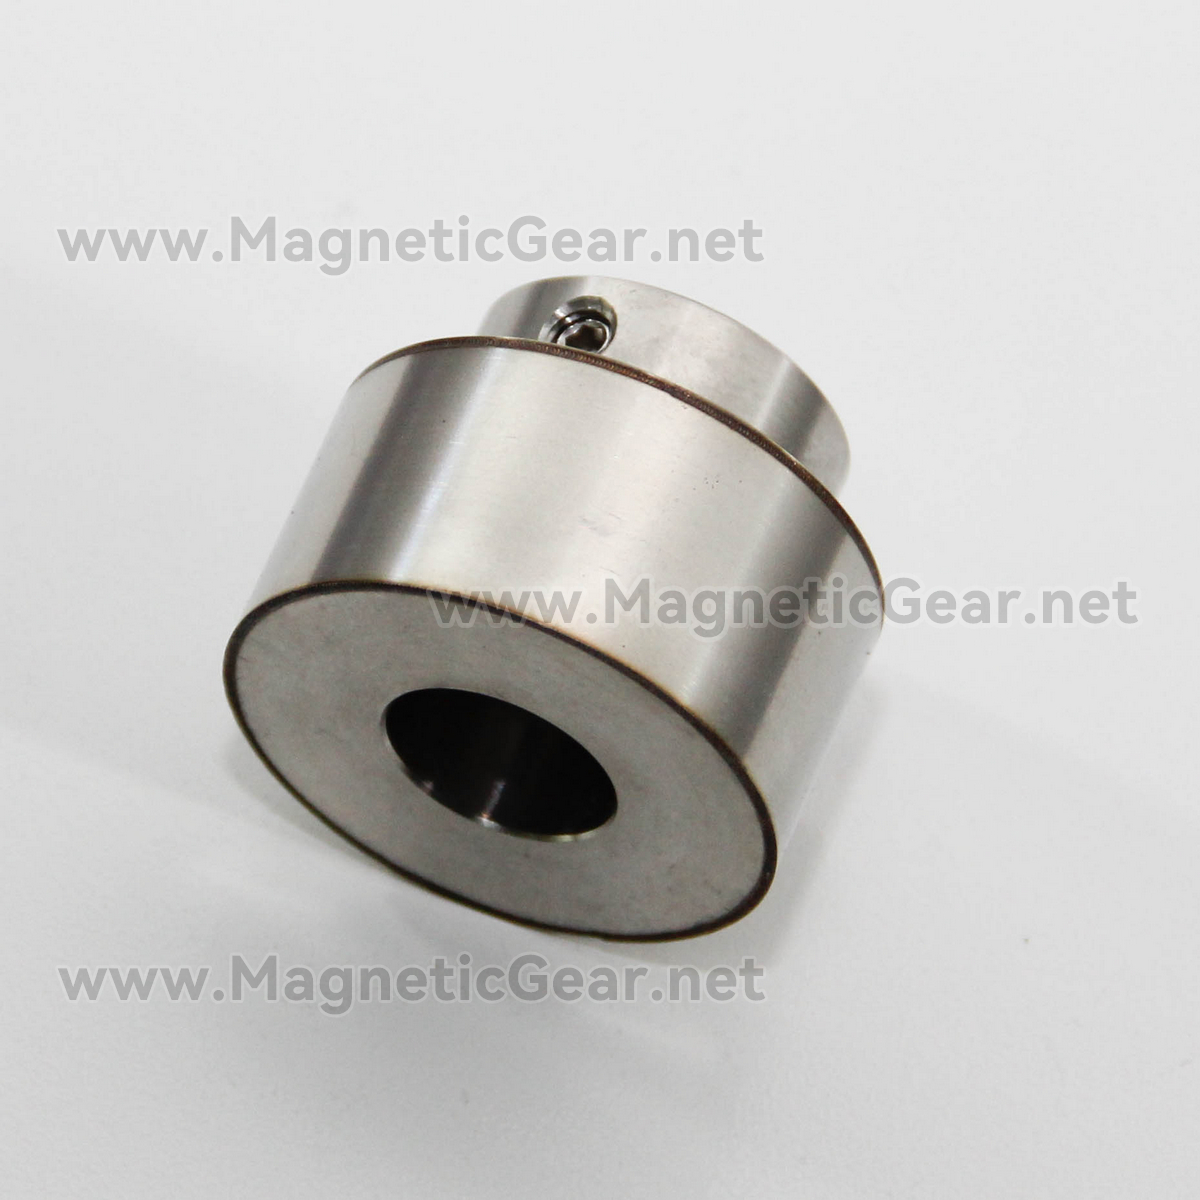 magnetic gear non-contact transmission neodymium